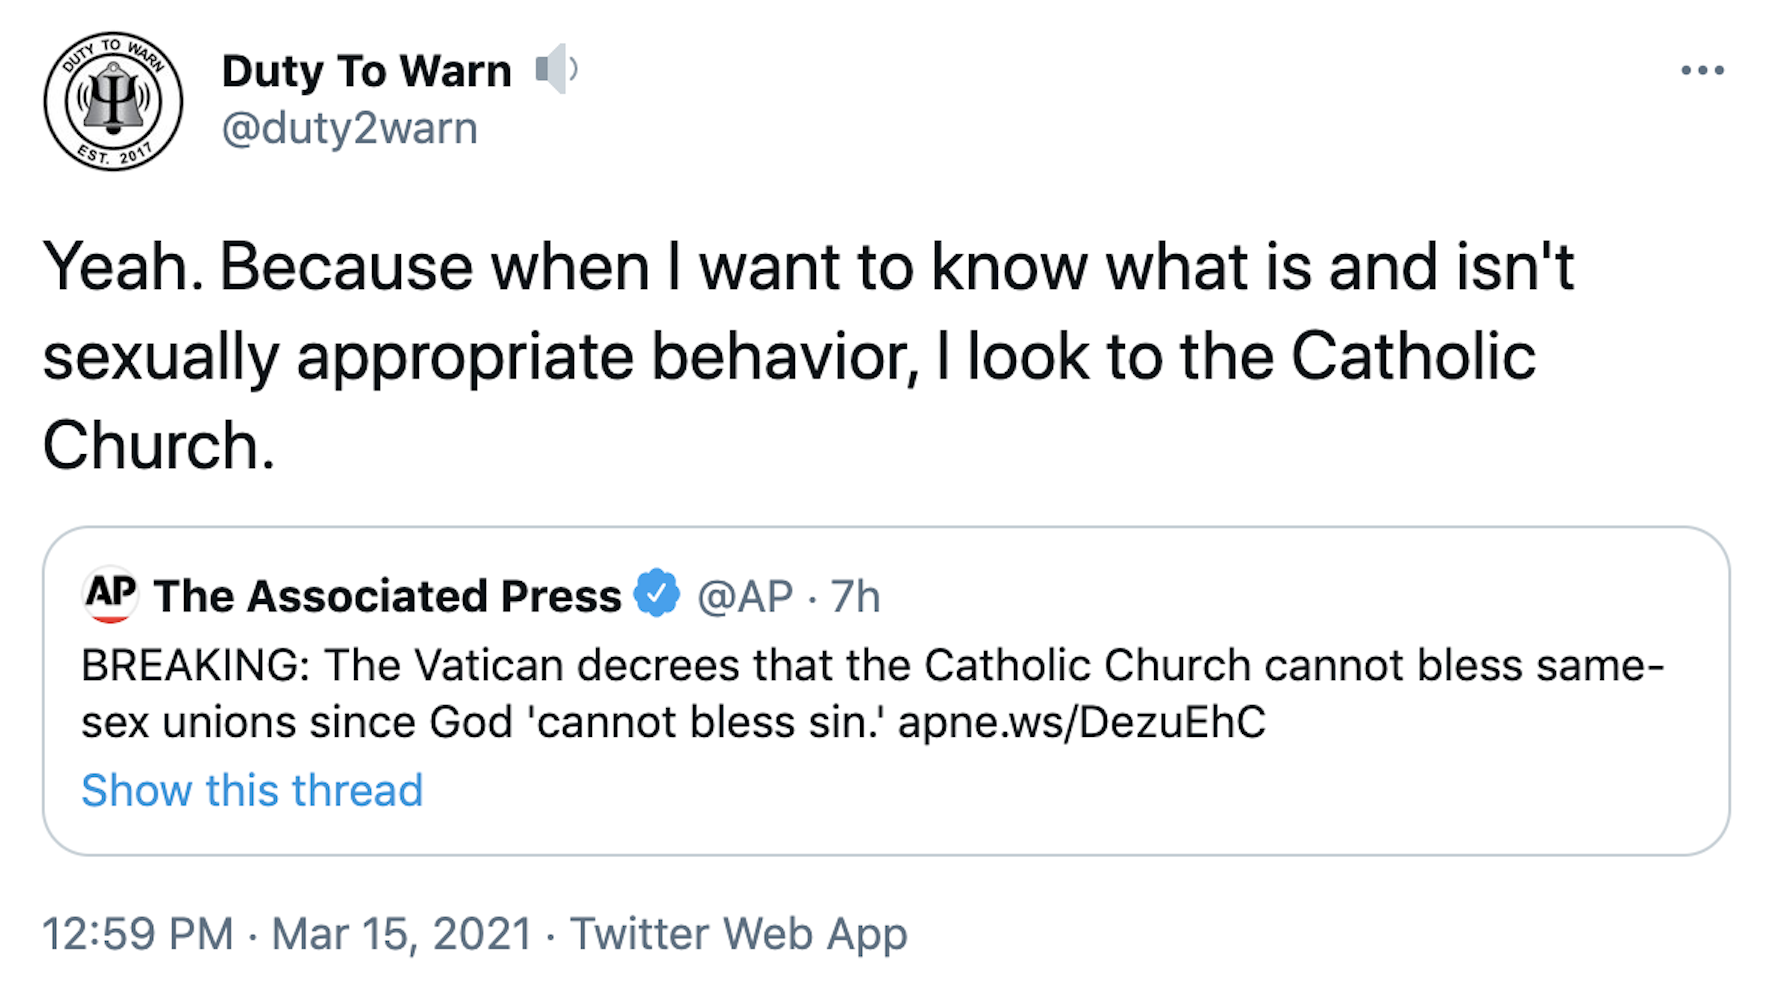 Yeah. Because when I want to know what is and isn't sexually appropriate behavior, I look to the Catholic Church.